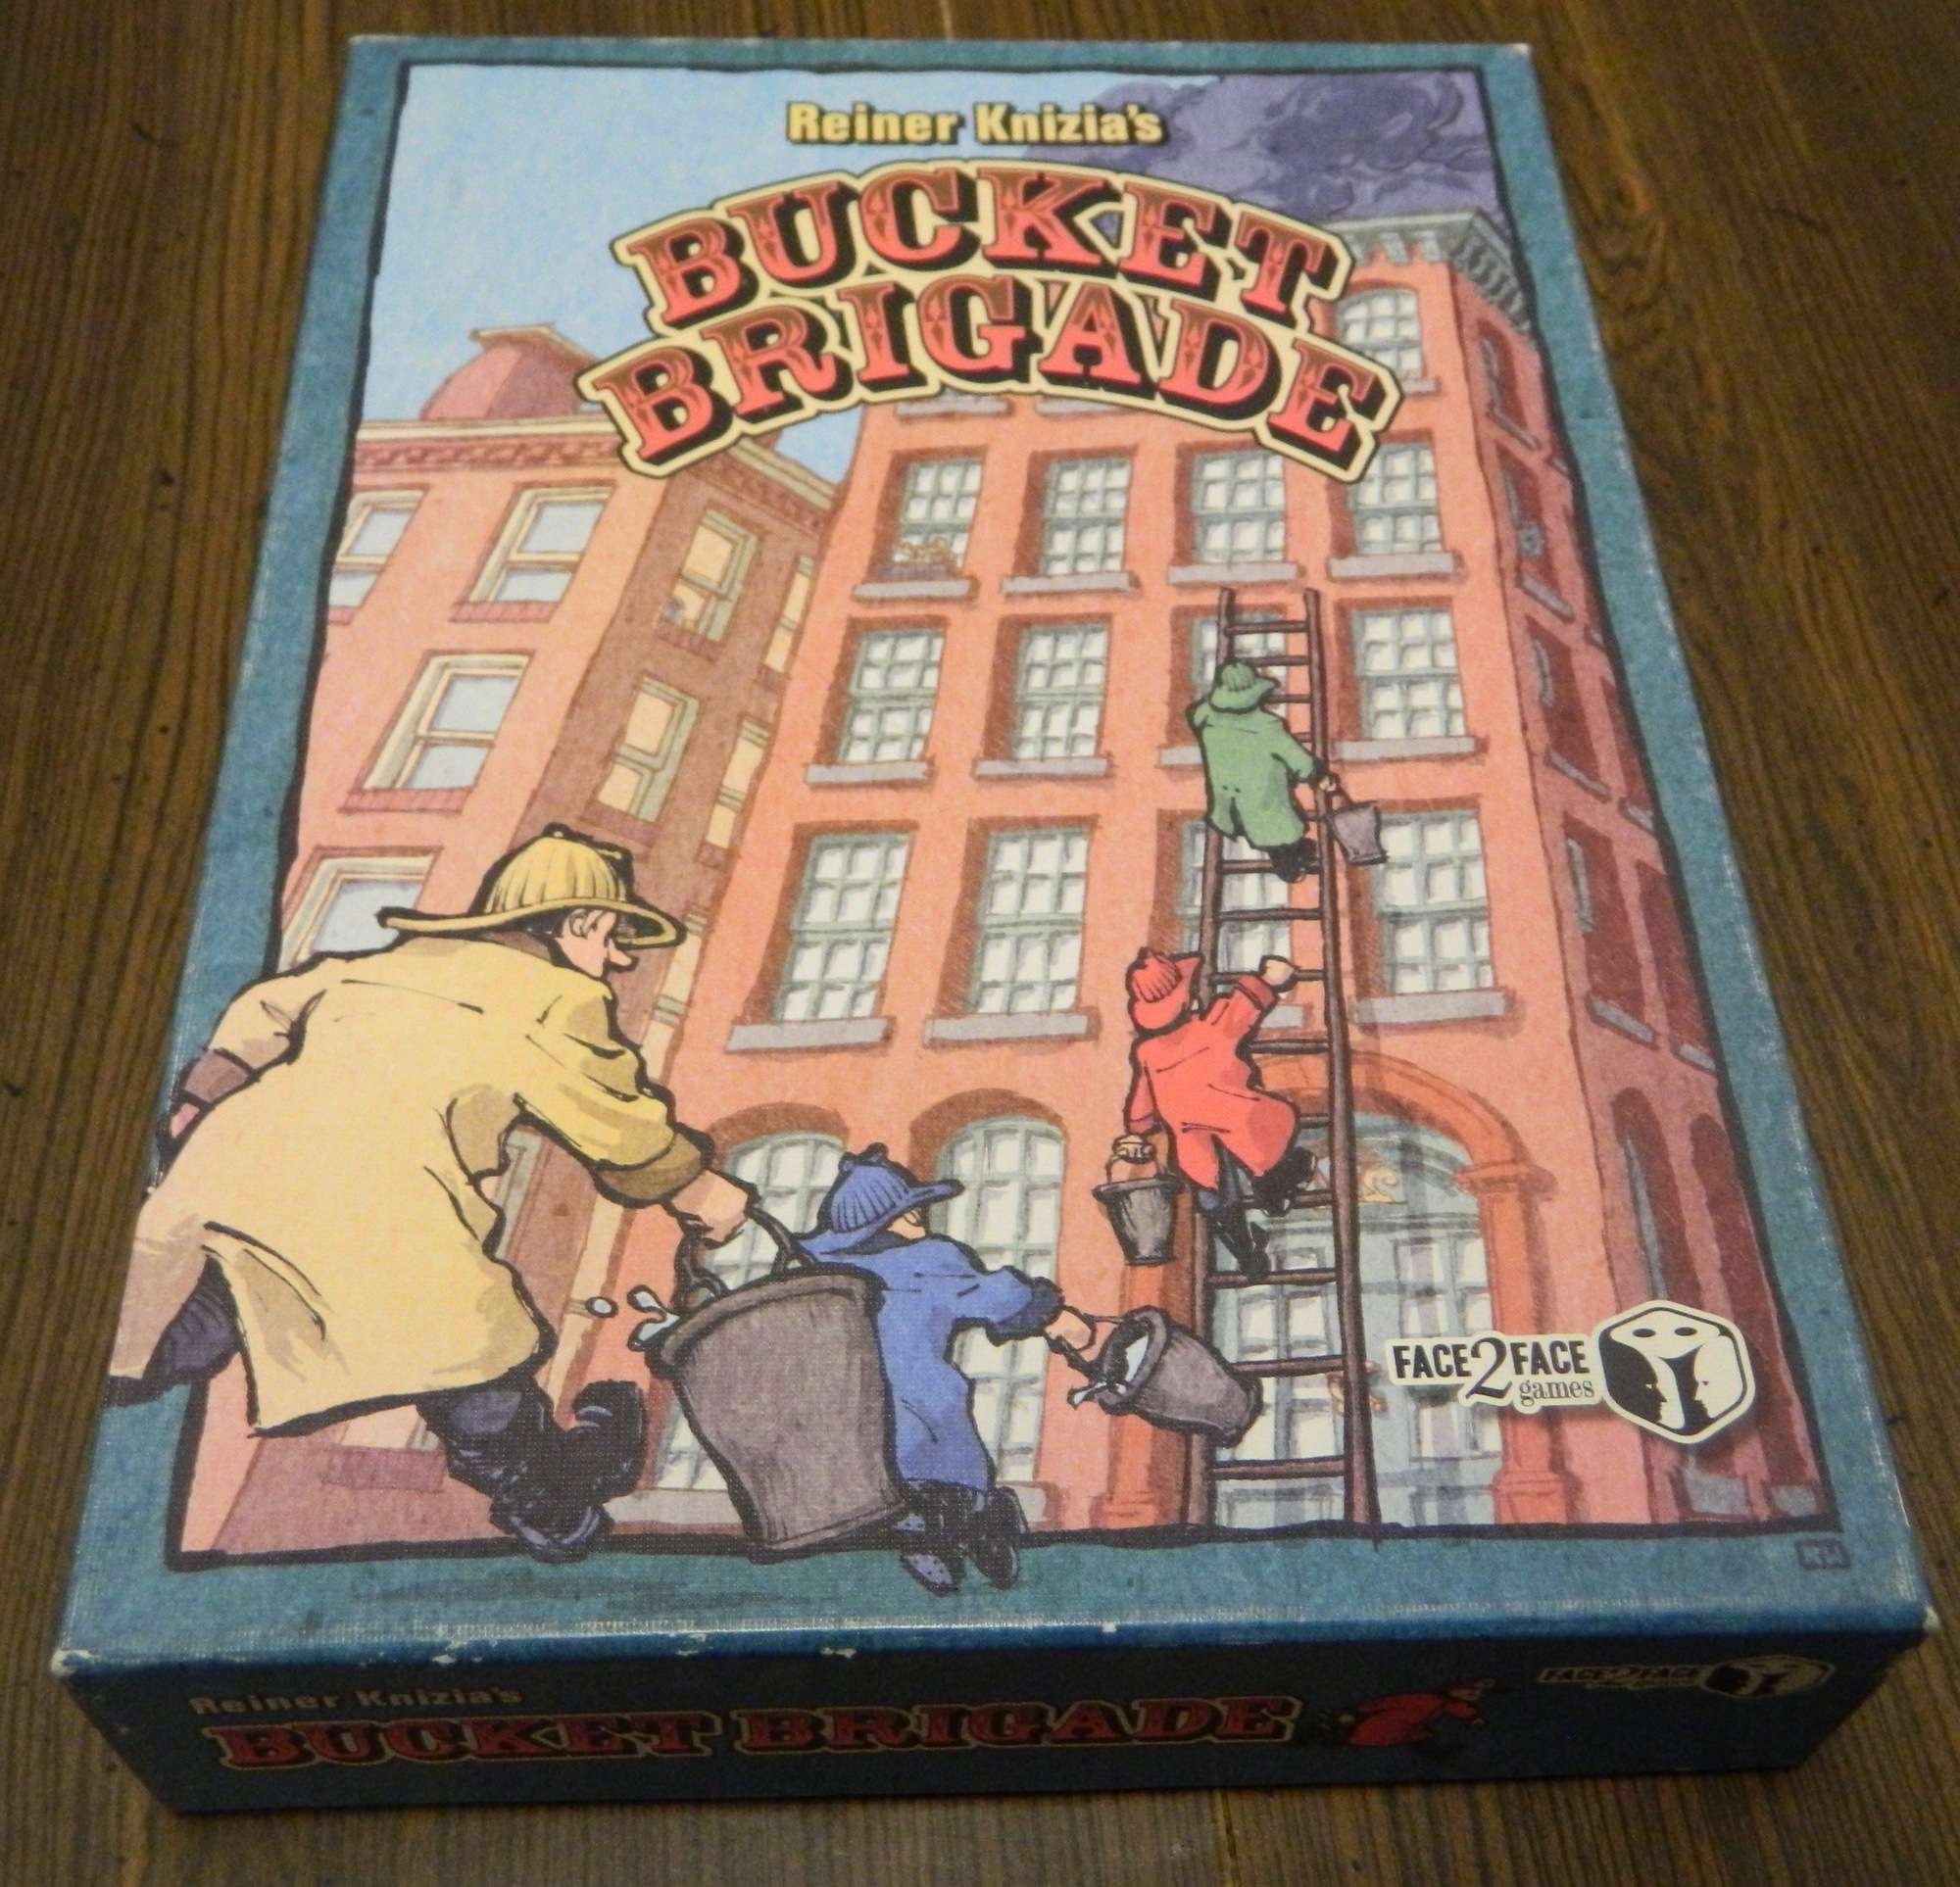 Bucket Brigade Board Game Review and Instructions